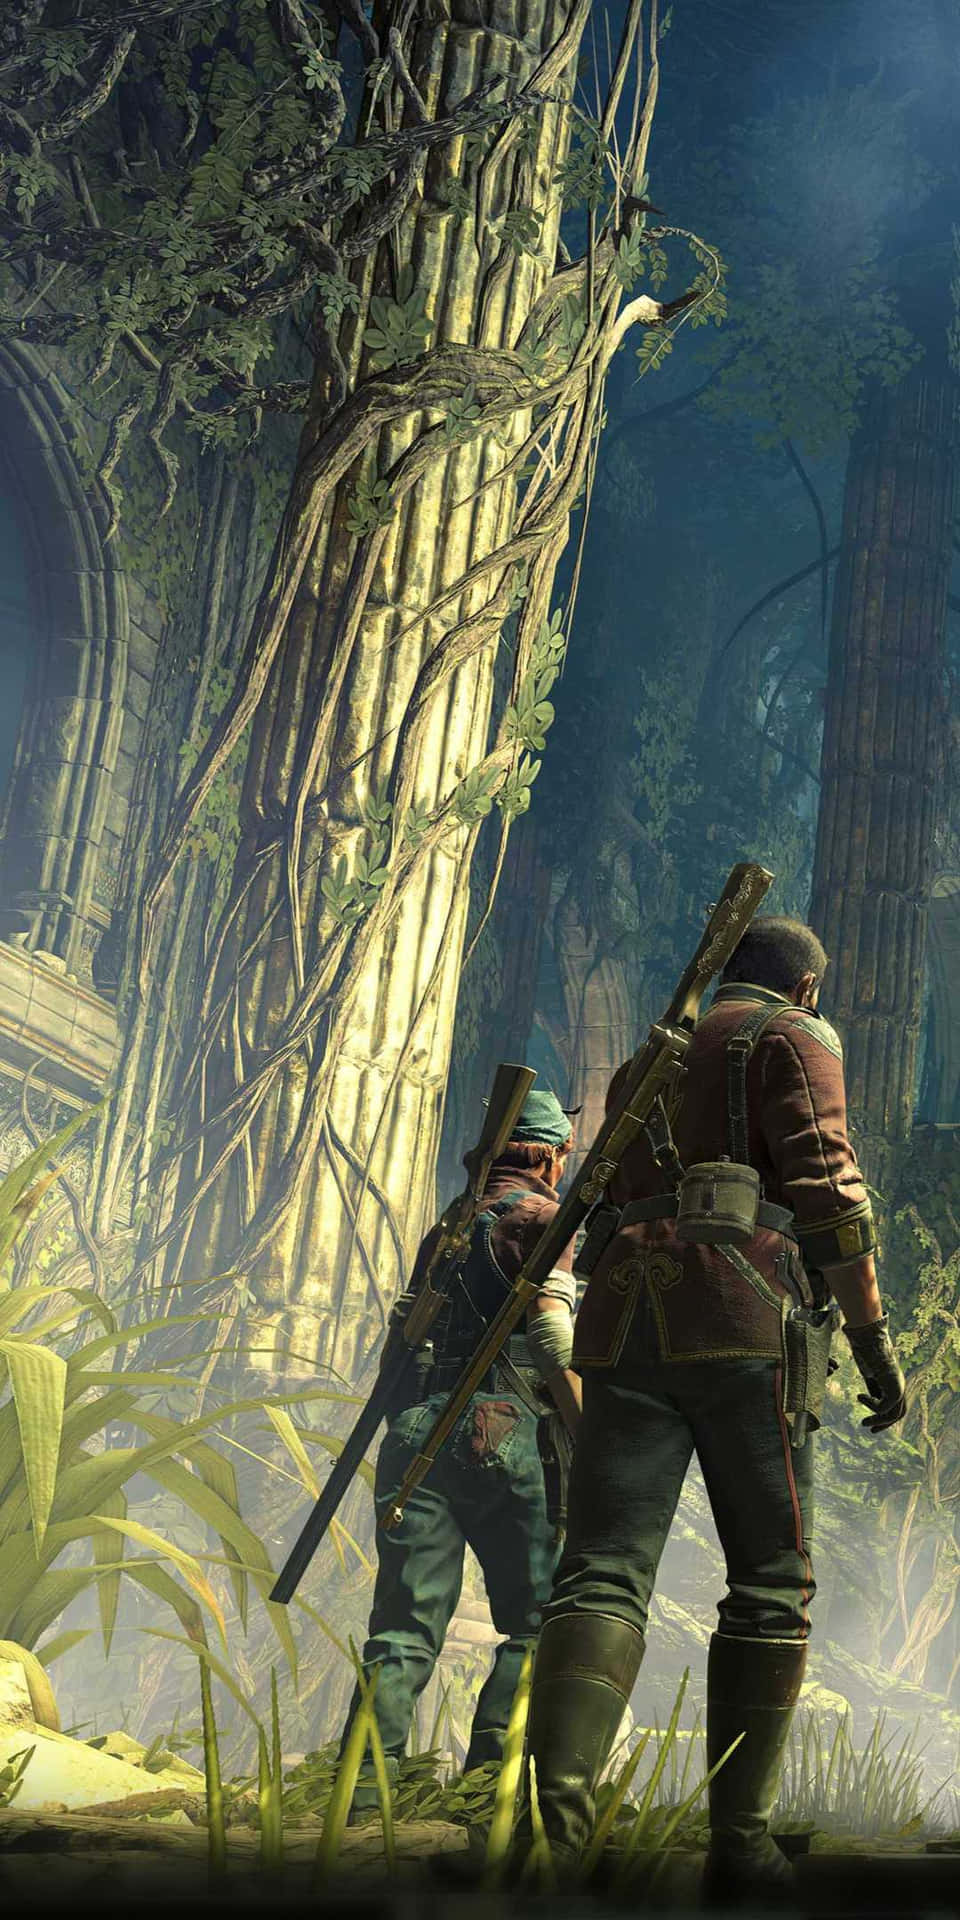 A Screenshot Of A Video Game With Two People In The Forest